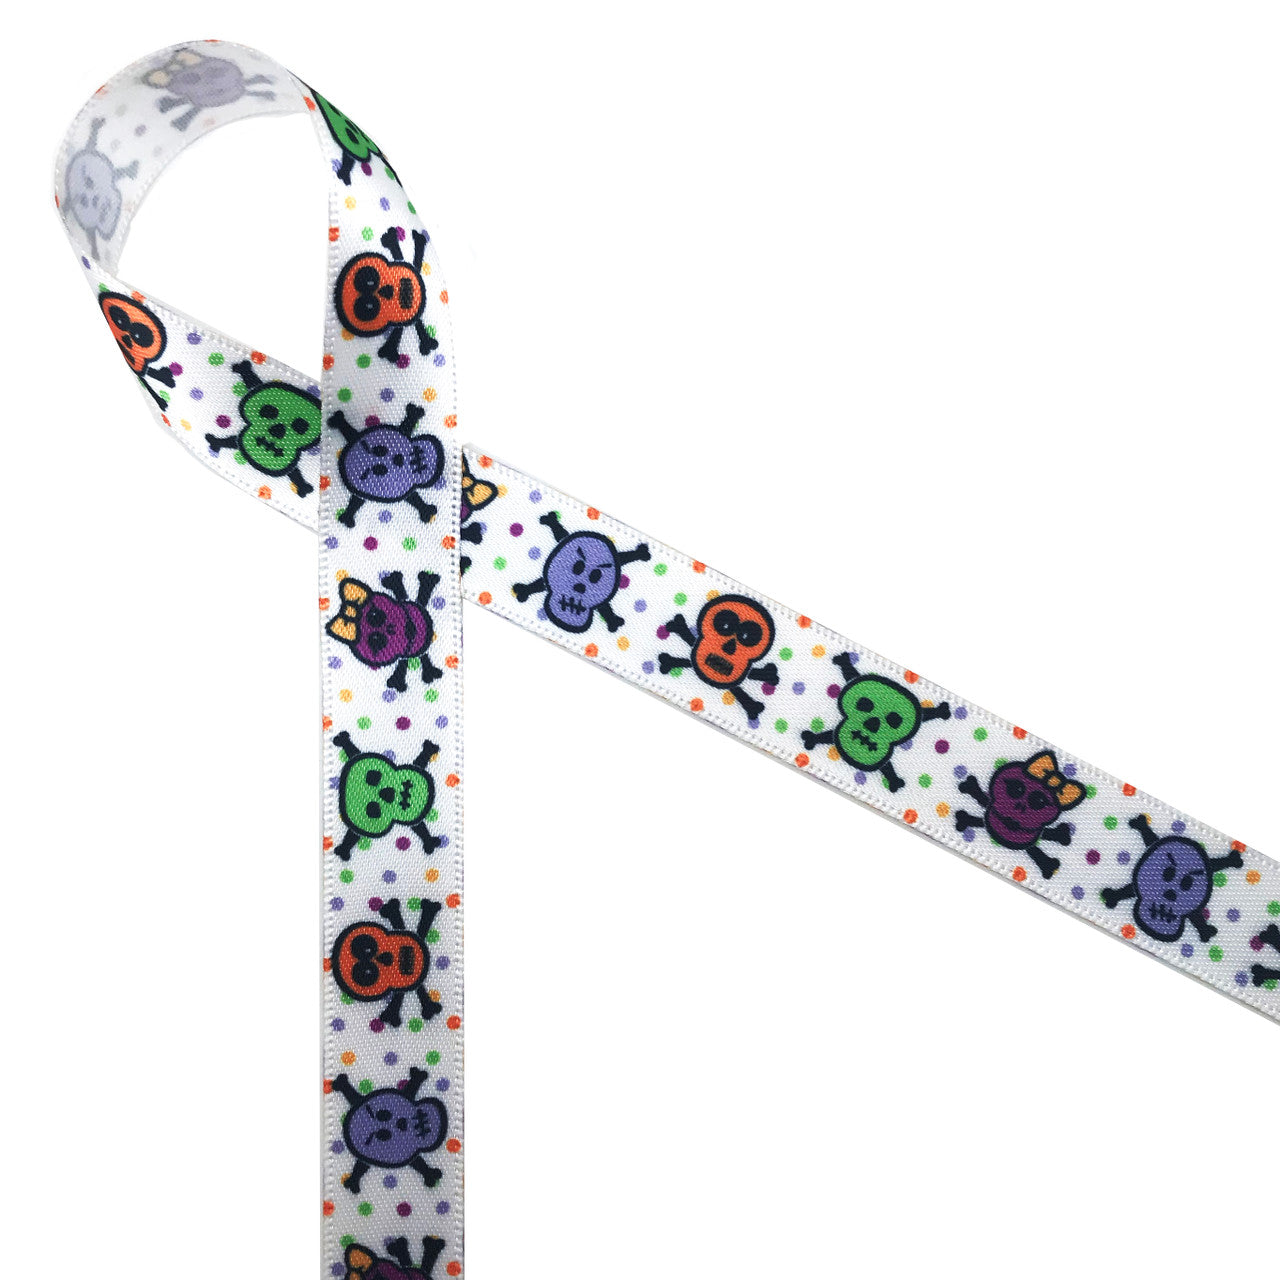 Skulls in purple, lavender, orange and green with black crossbones are lined up on a polka dotted background on a 5/8" white single face satin ribbon. This little ribbon is mostly fun and not too scary and will be the perfect addition to your Halloween party favors!